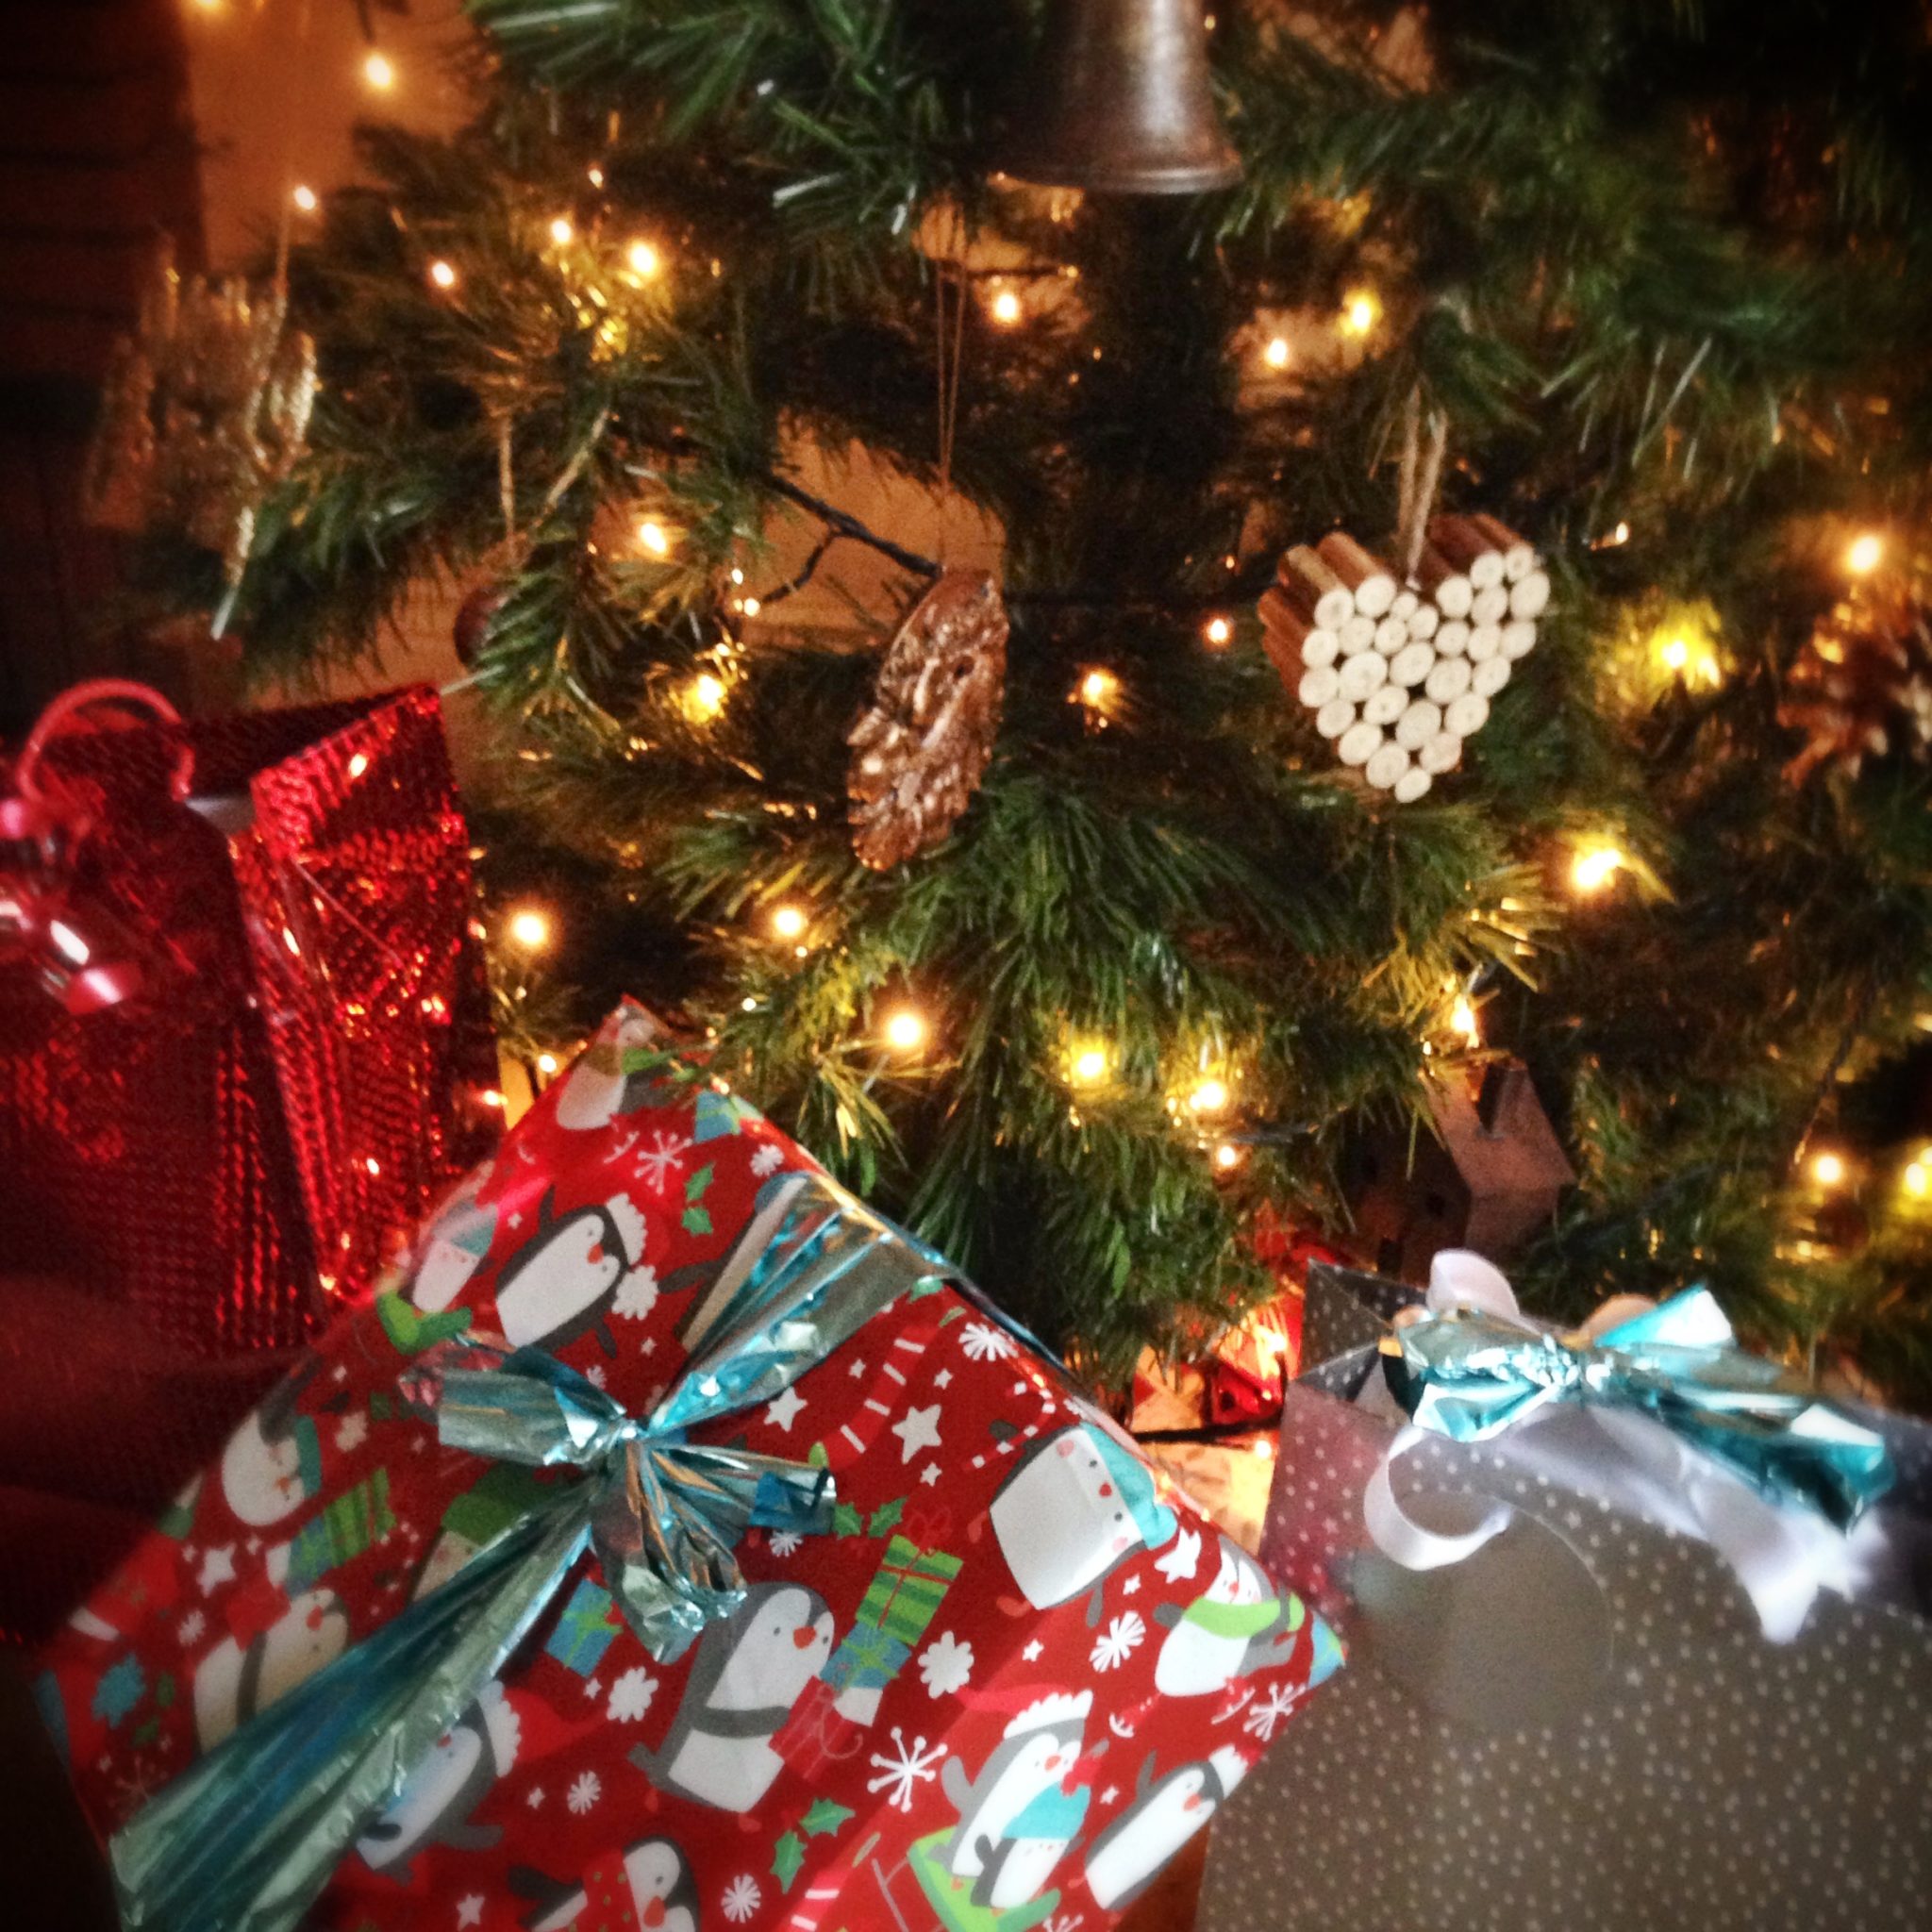 18 December – Christmas present wrapping